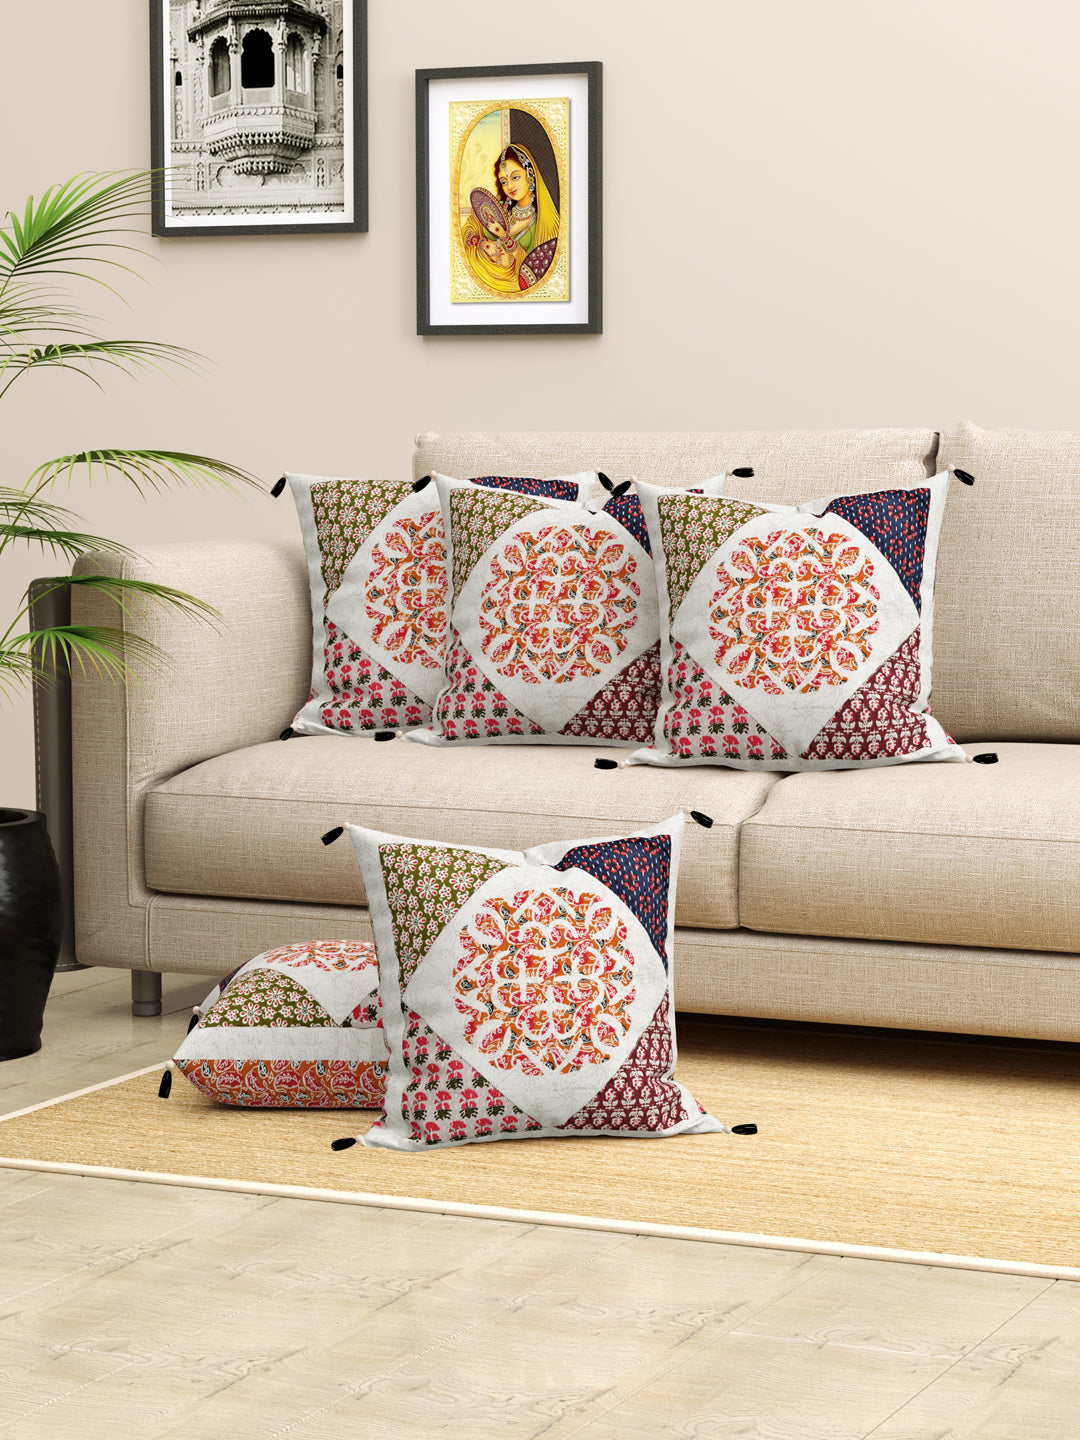 Living Roots Ethnic Patchwork Cotton Cushion Cover- Set of 5 (40-024-B)